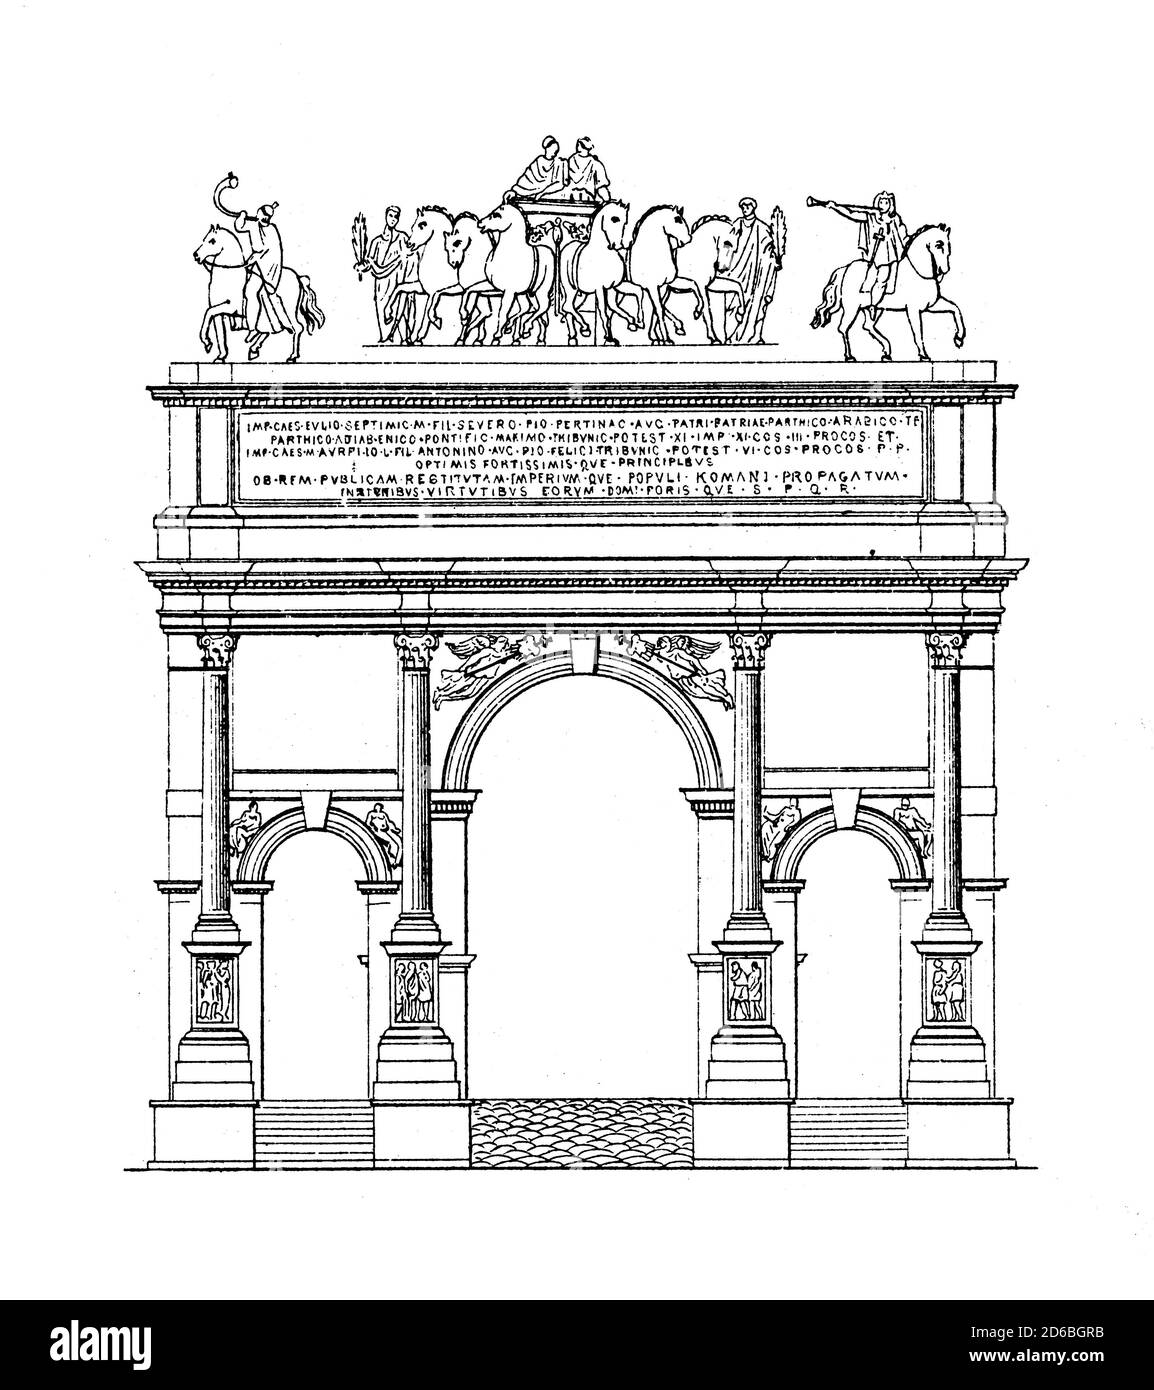 Antique 19th-century illustration of the Arch of Septimius Severus in Rome. Engraving published in Vergleichende Architektonische Formenlehre by Carl Stock Photo